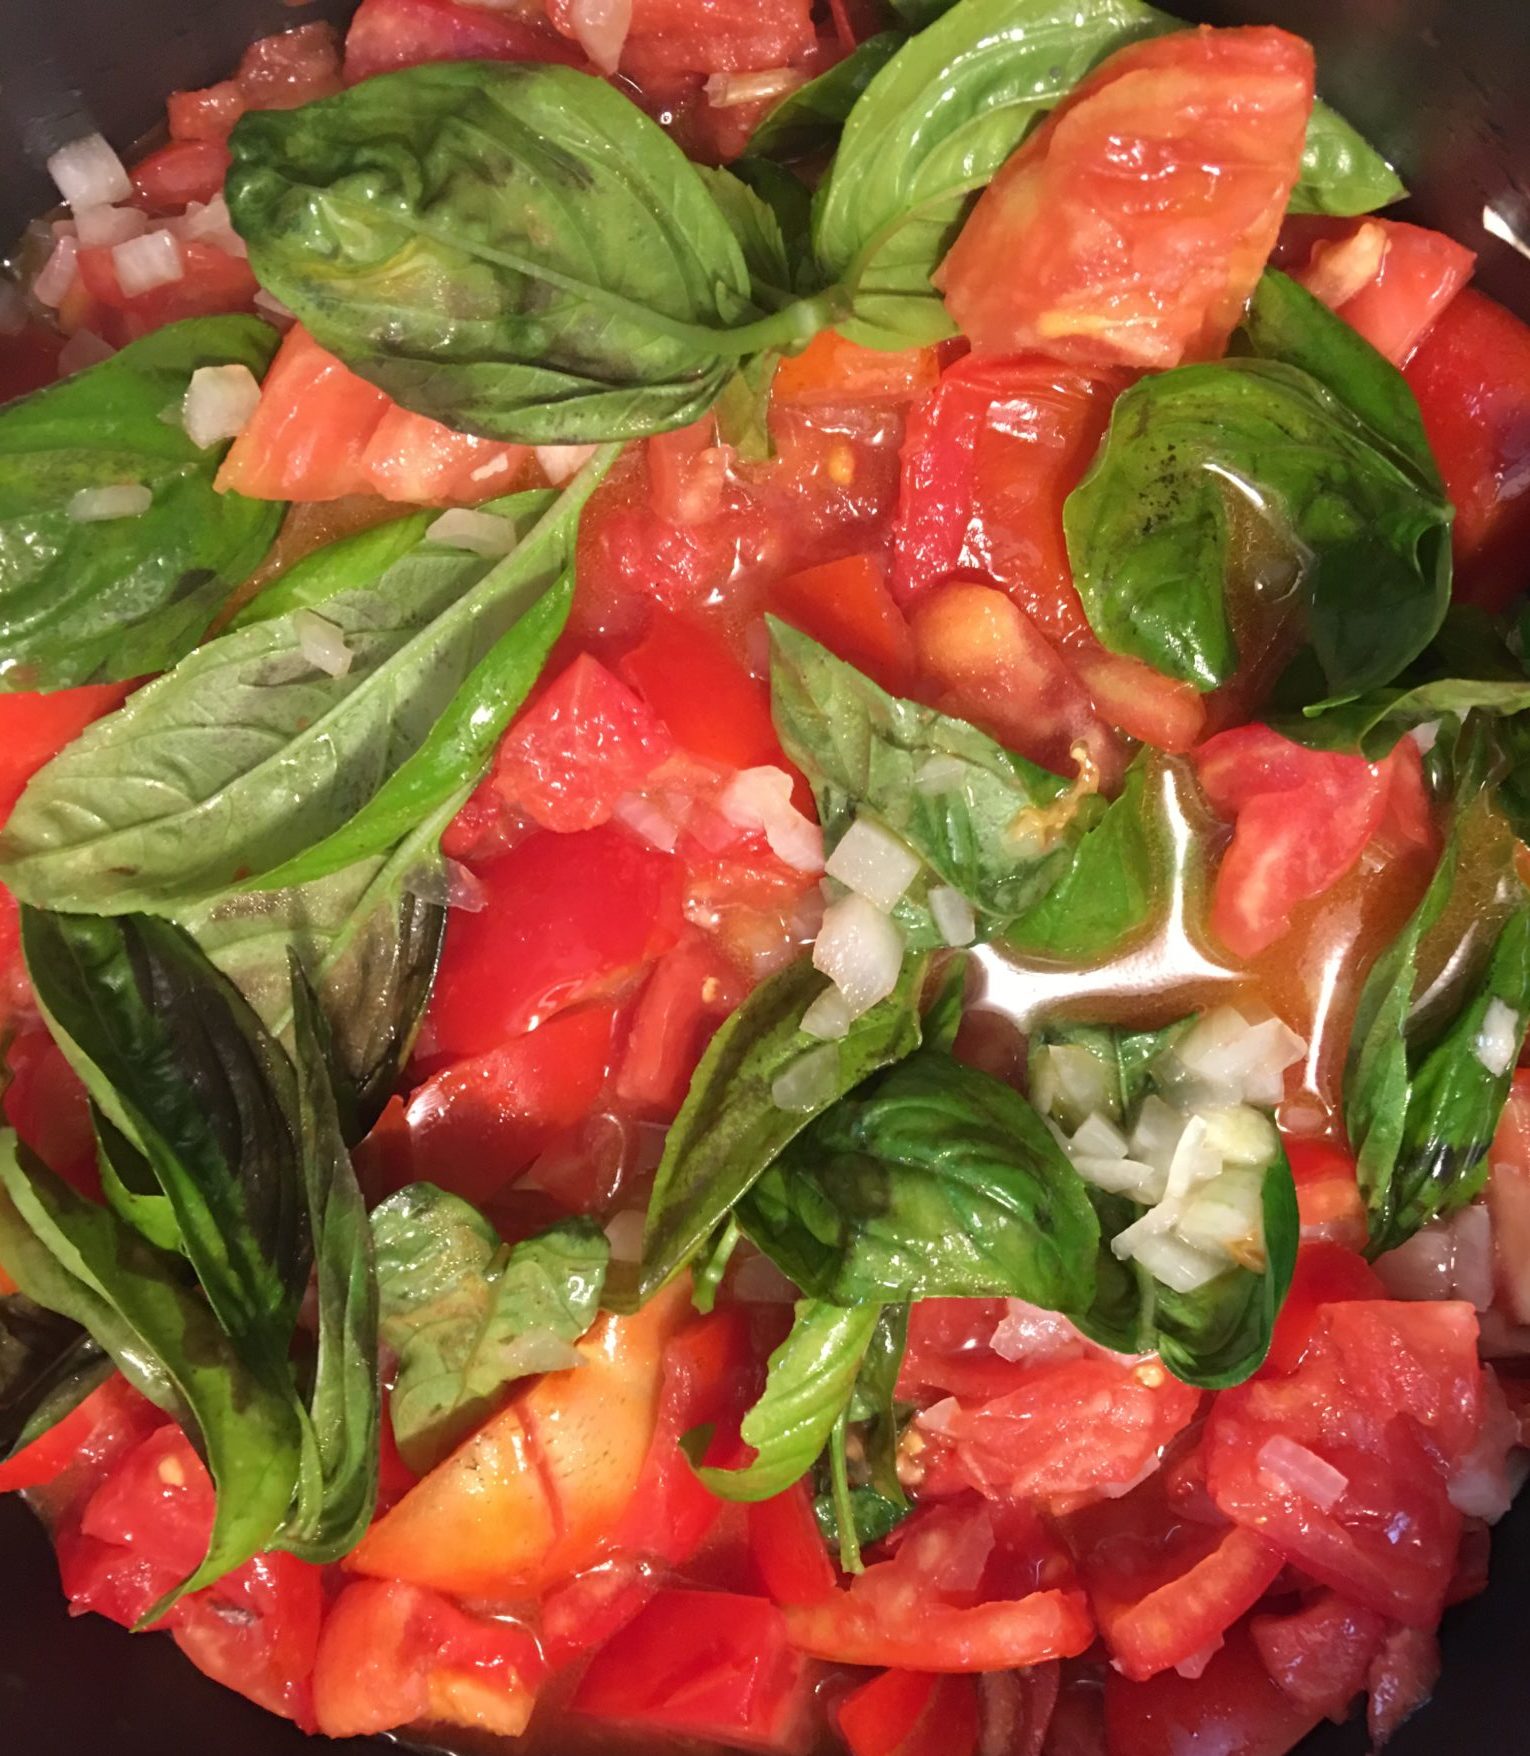 Basil and tomatoes in a pot